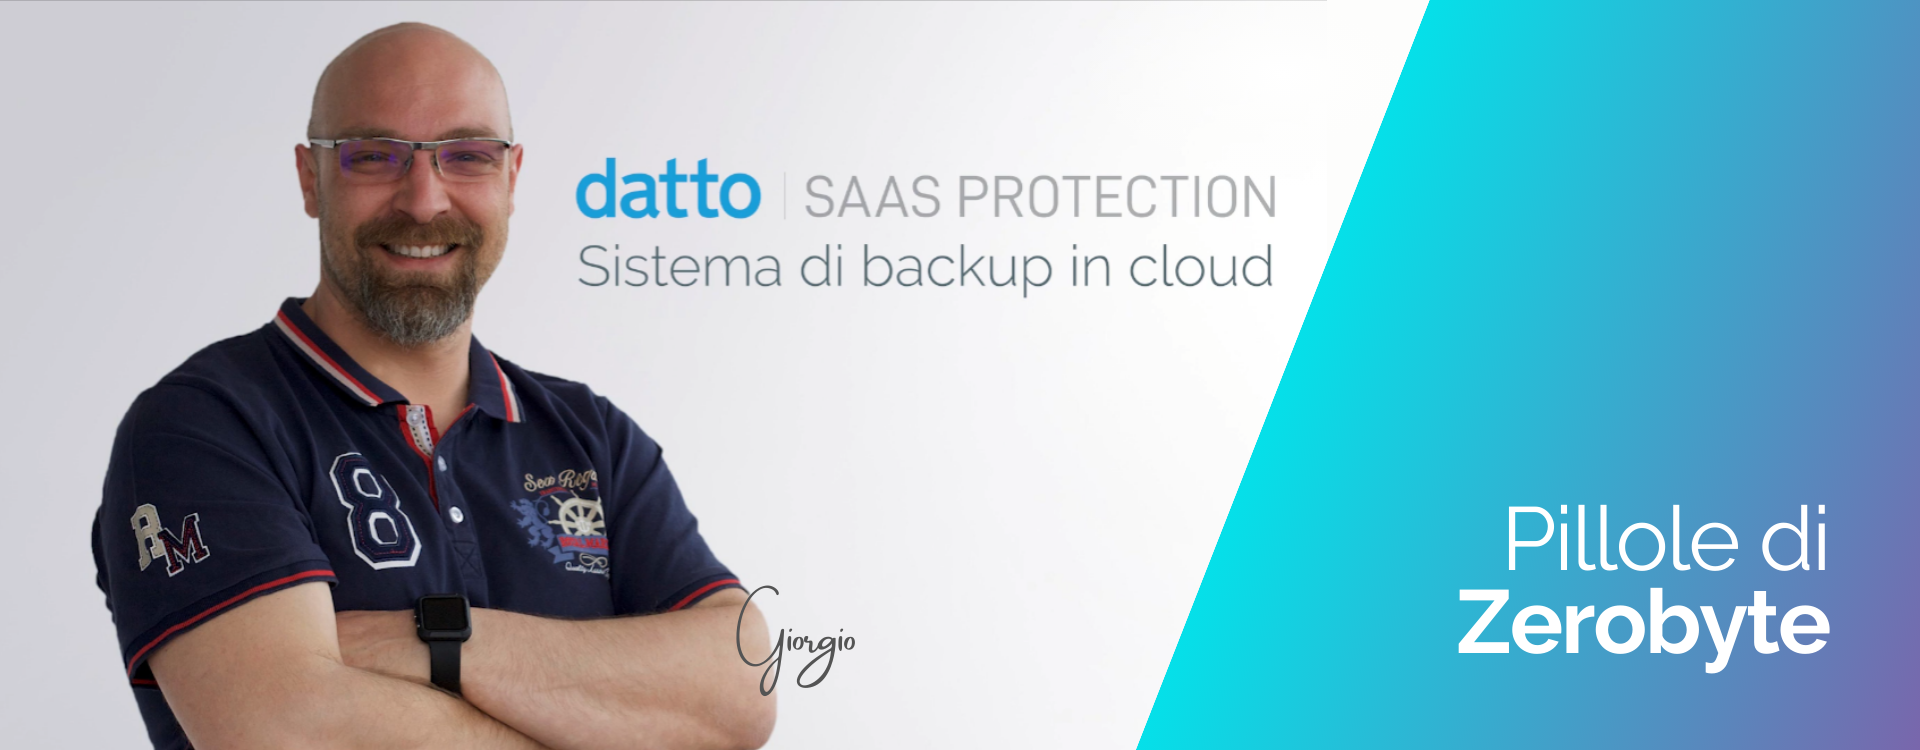 Datto Saas Protection